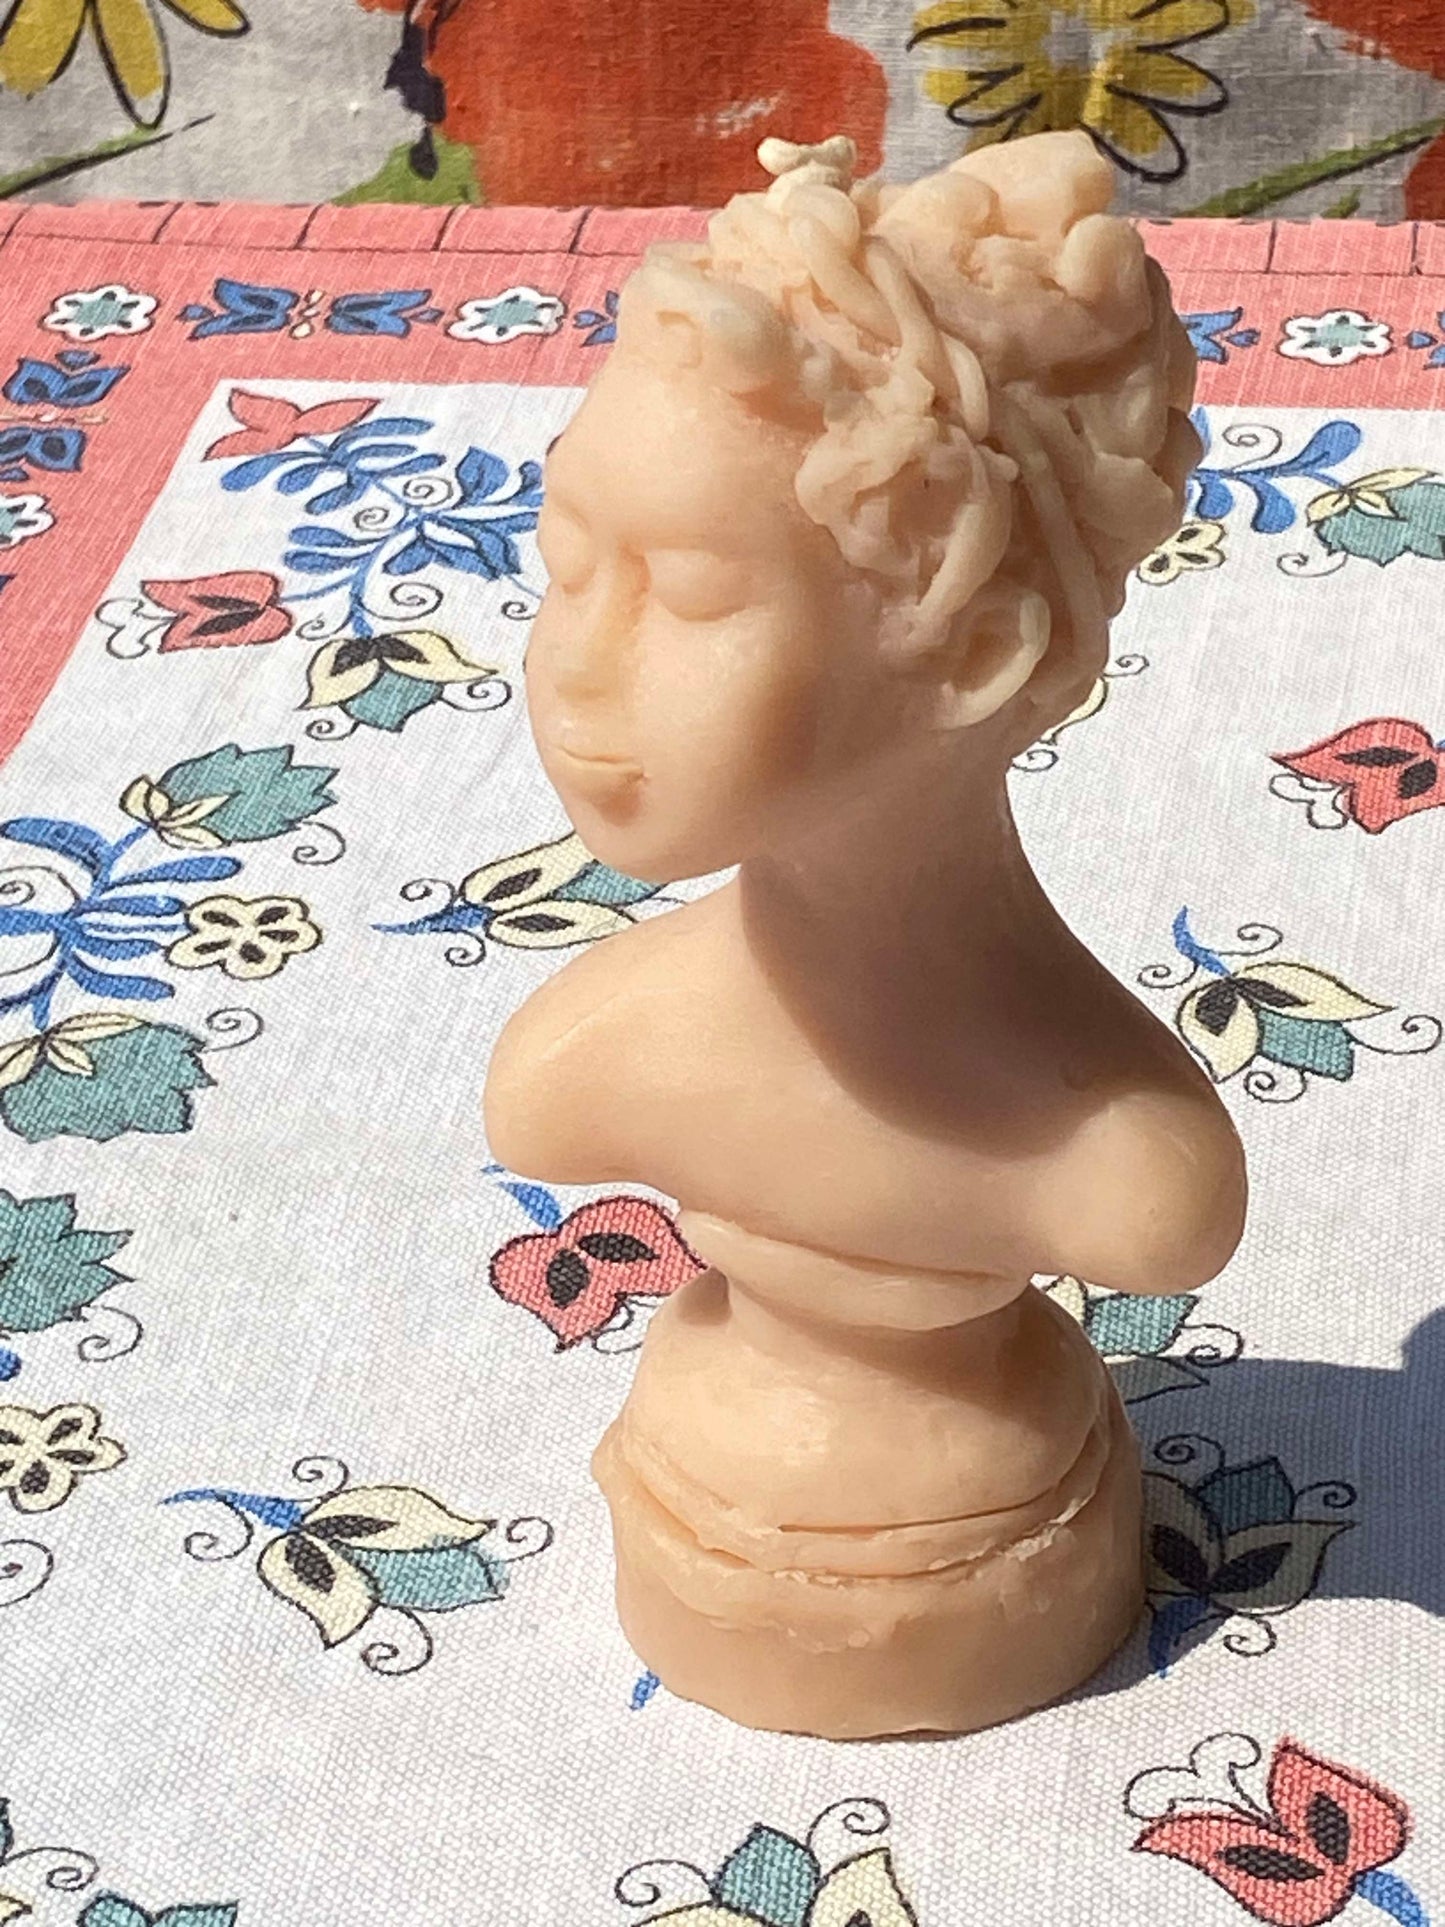 SMITH BOWEN - LARGE PALE PINK BUST CANDLE